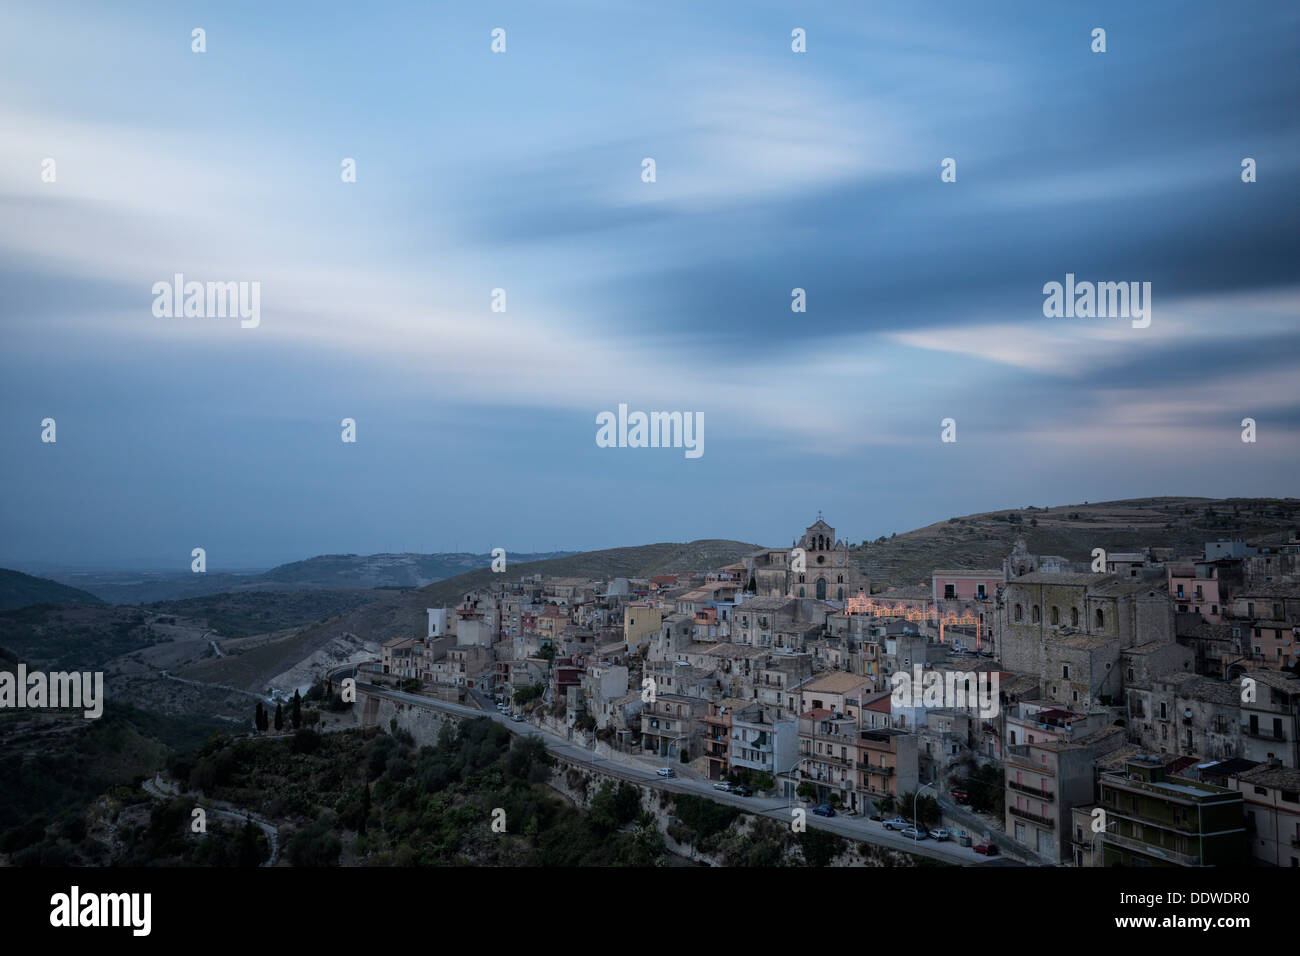 Sunset view at hilltop town of Monterosso Almo, Sicily, Italy Stock Photo